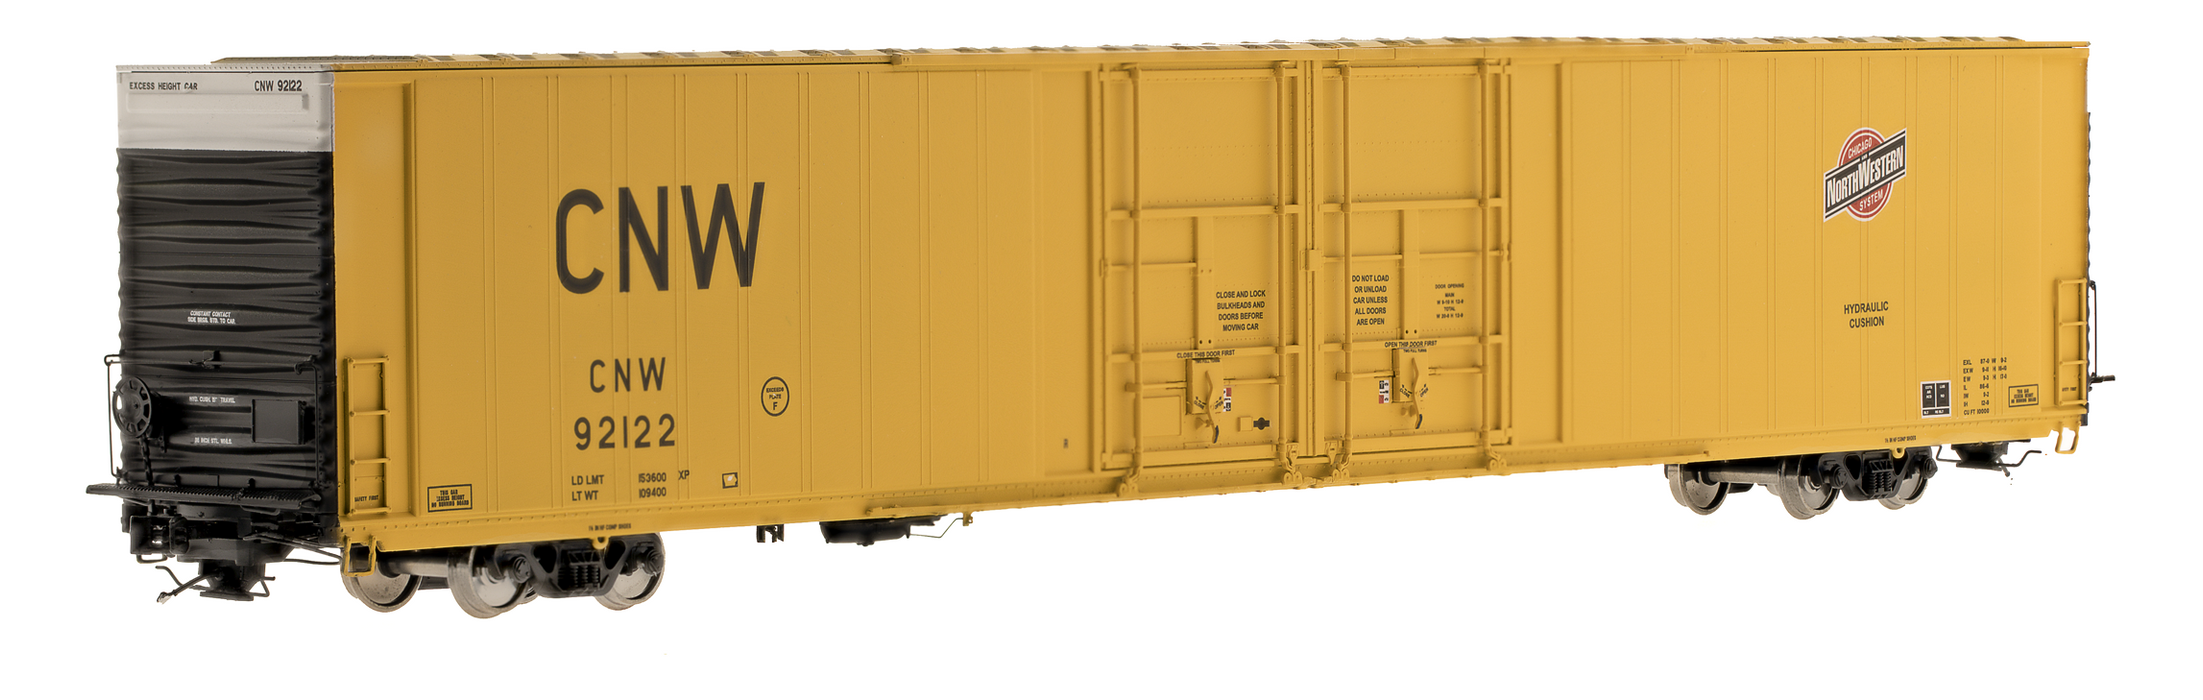 Class One Model Works FC00308 HO Scale Thrall 86' 4 Door Boxcar Chicago NorthWestern C&NW 92513